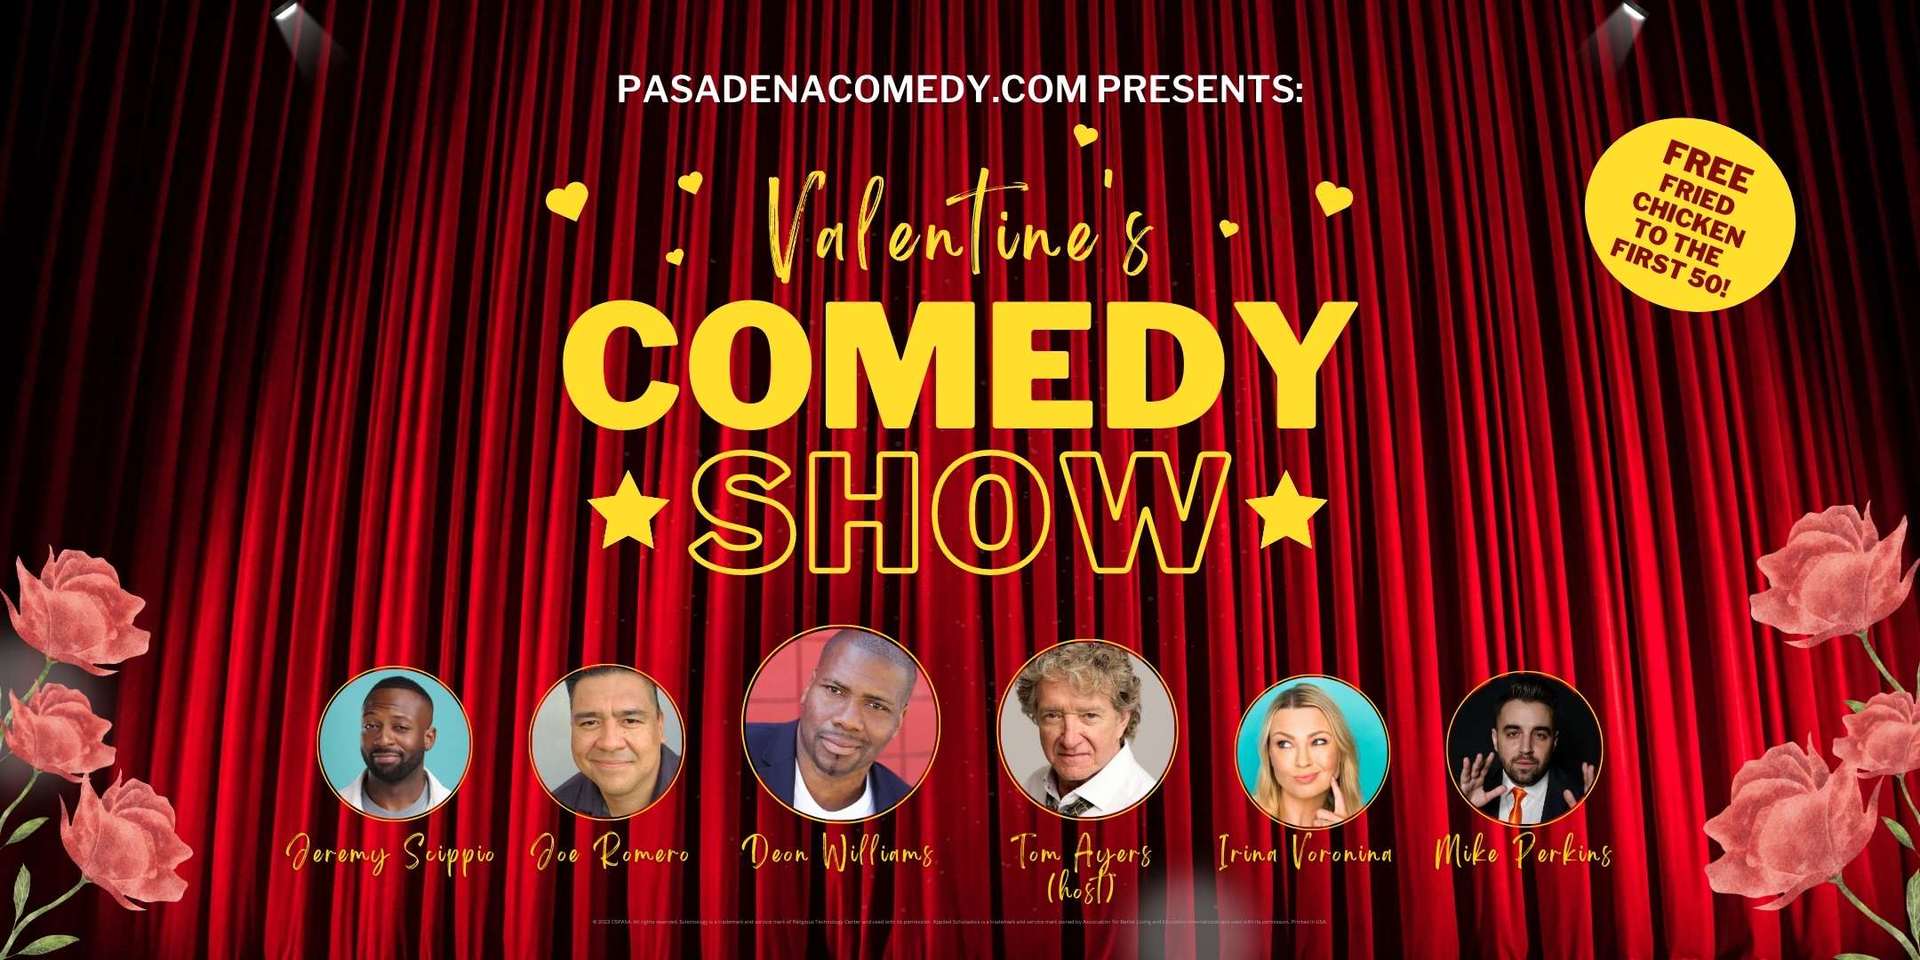 Valentine's Comedy Show in Pasadena. Free Admission, Free Fried Chicken Feb 10, Pasadena, California, United States